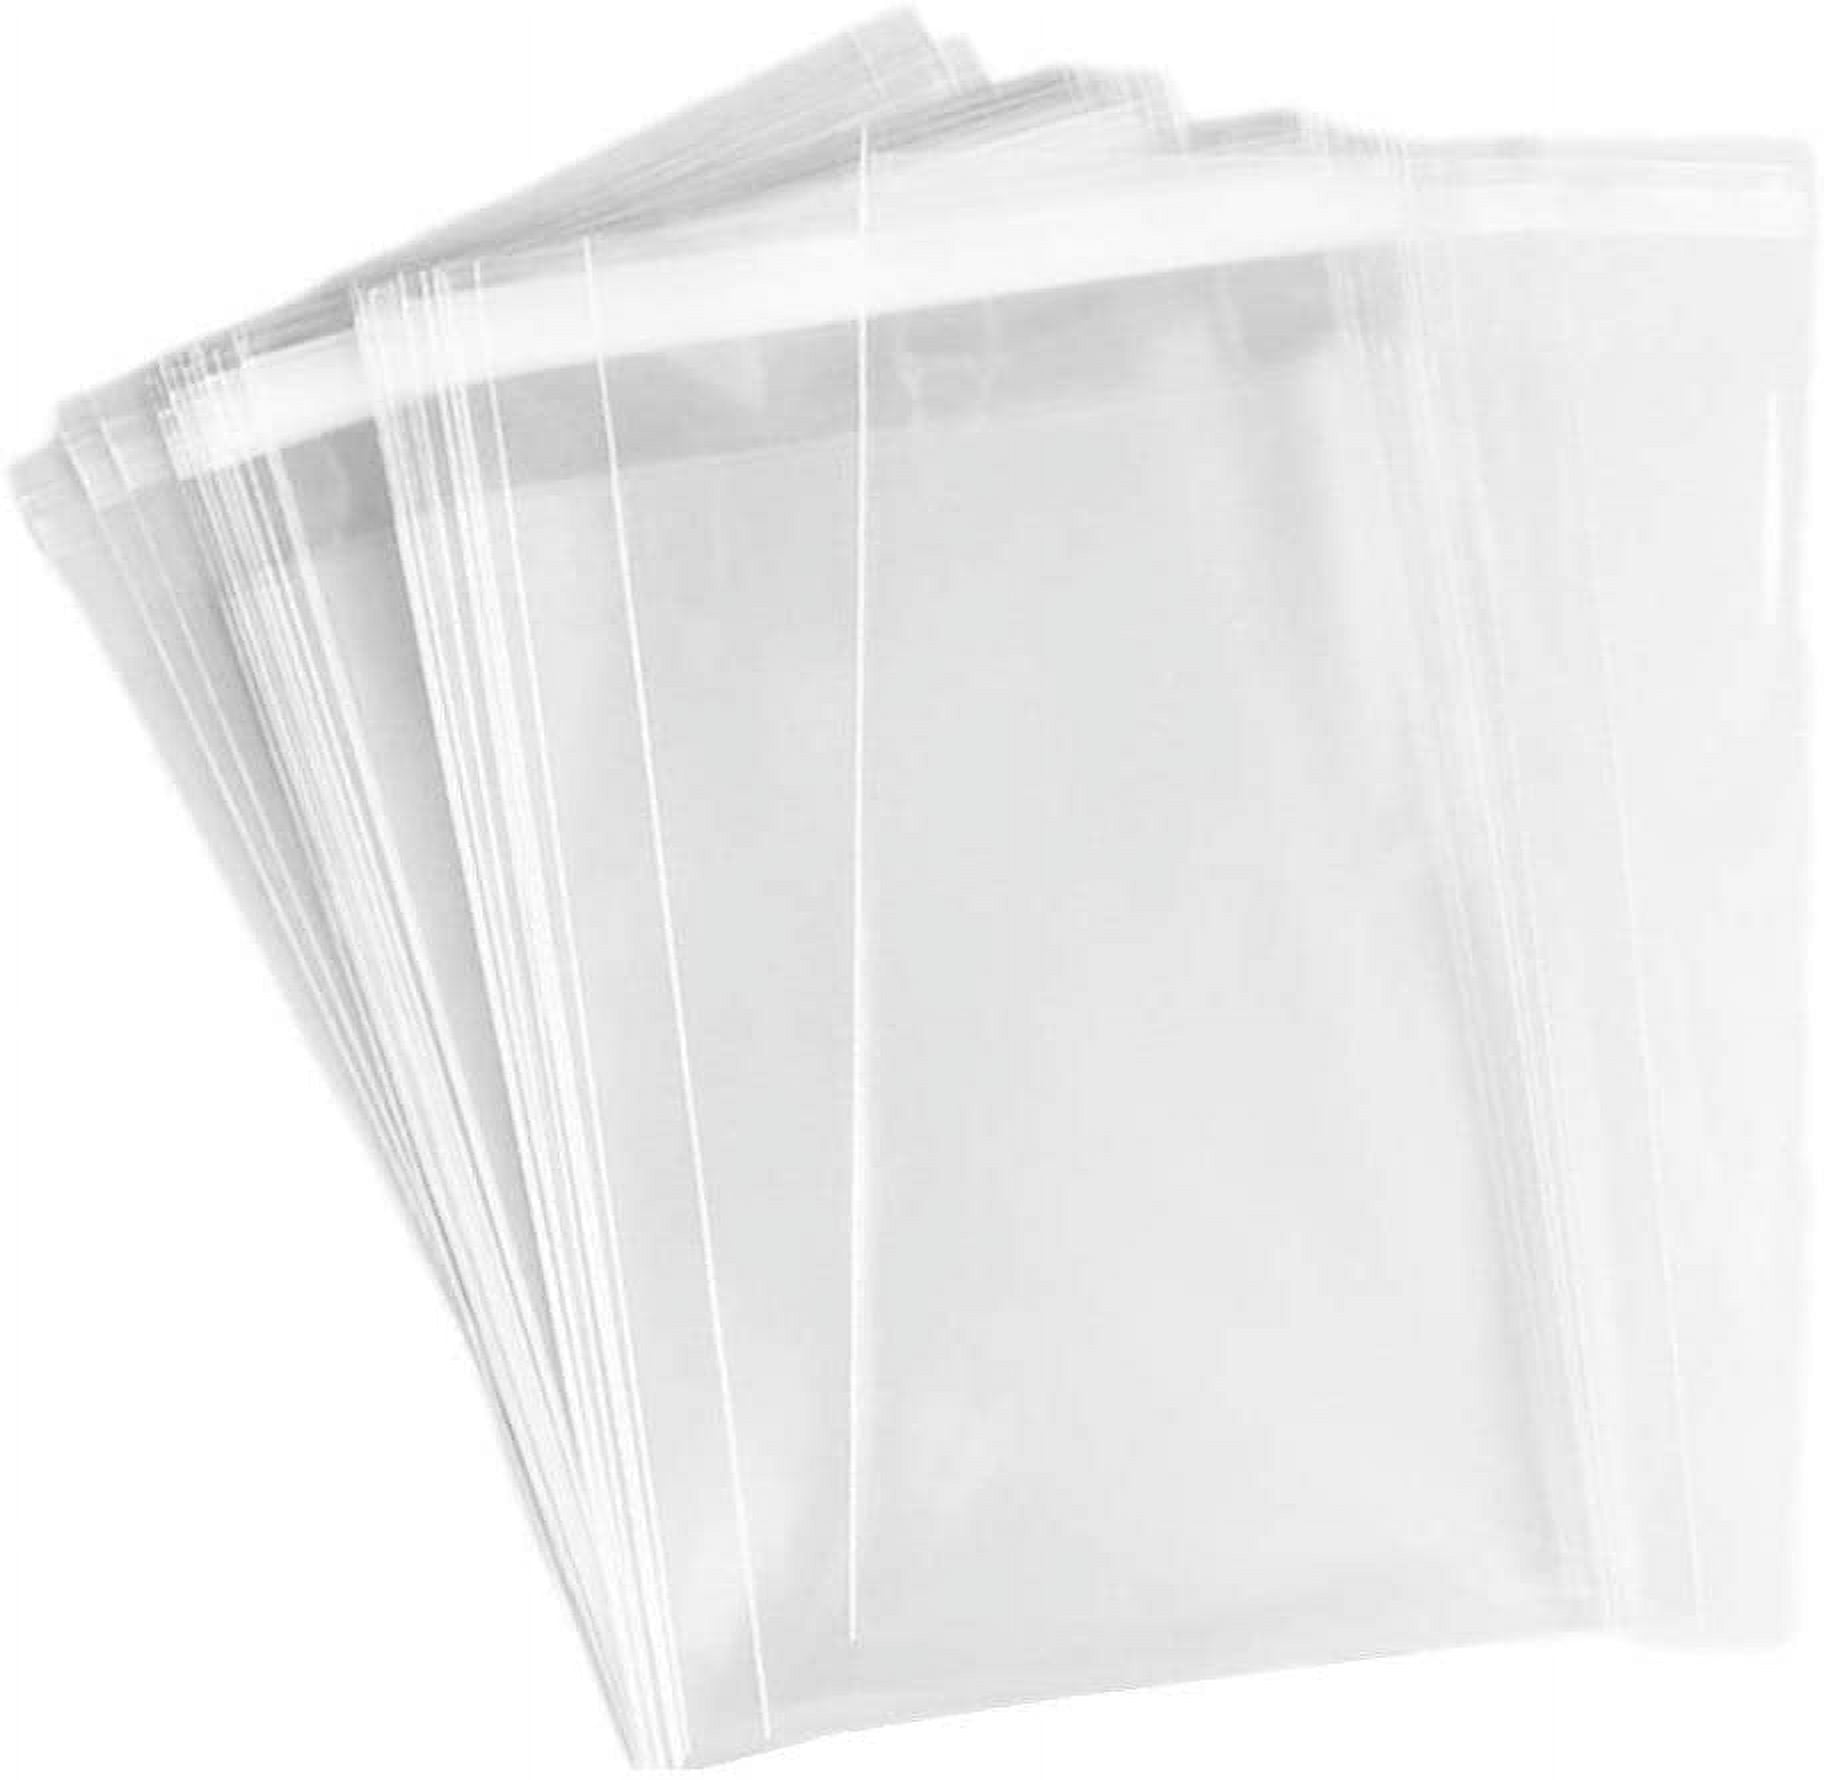  Large Cellophane Treat Bags,12x16 Inches Clear Cello